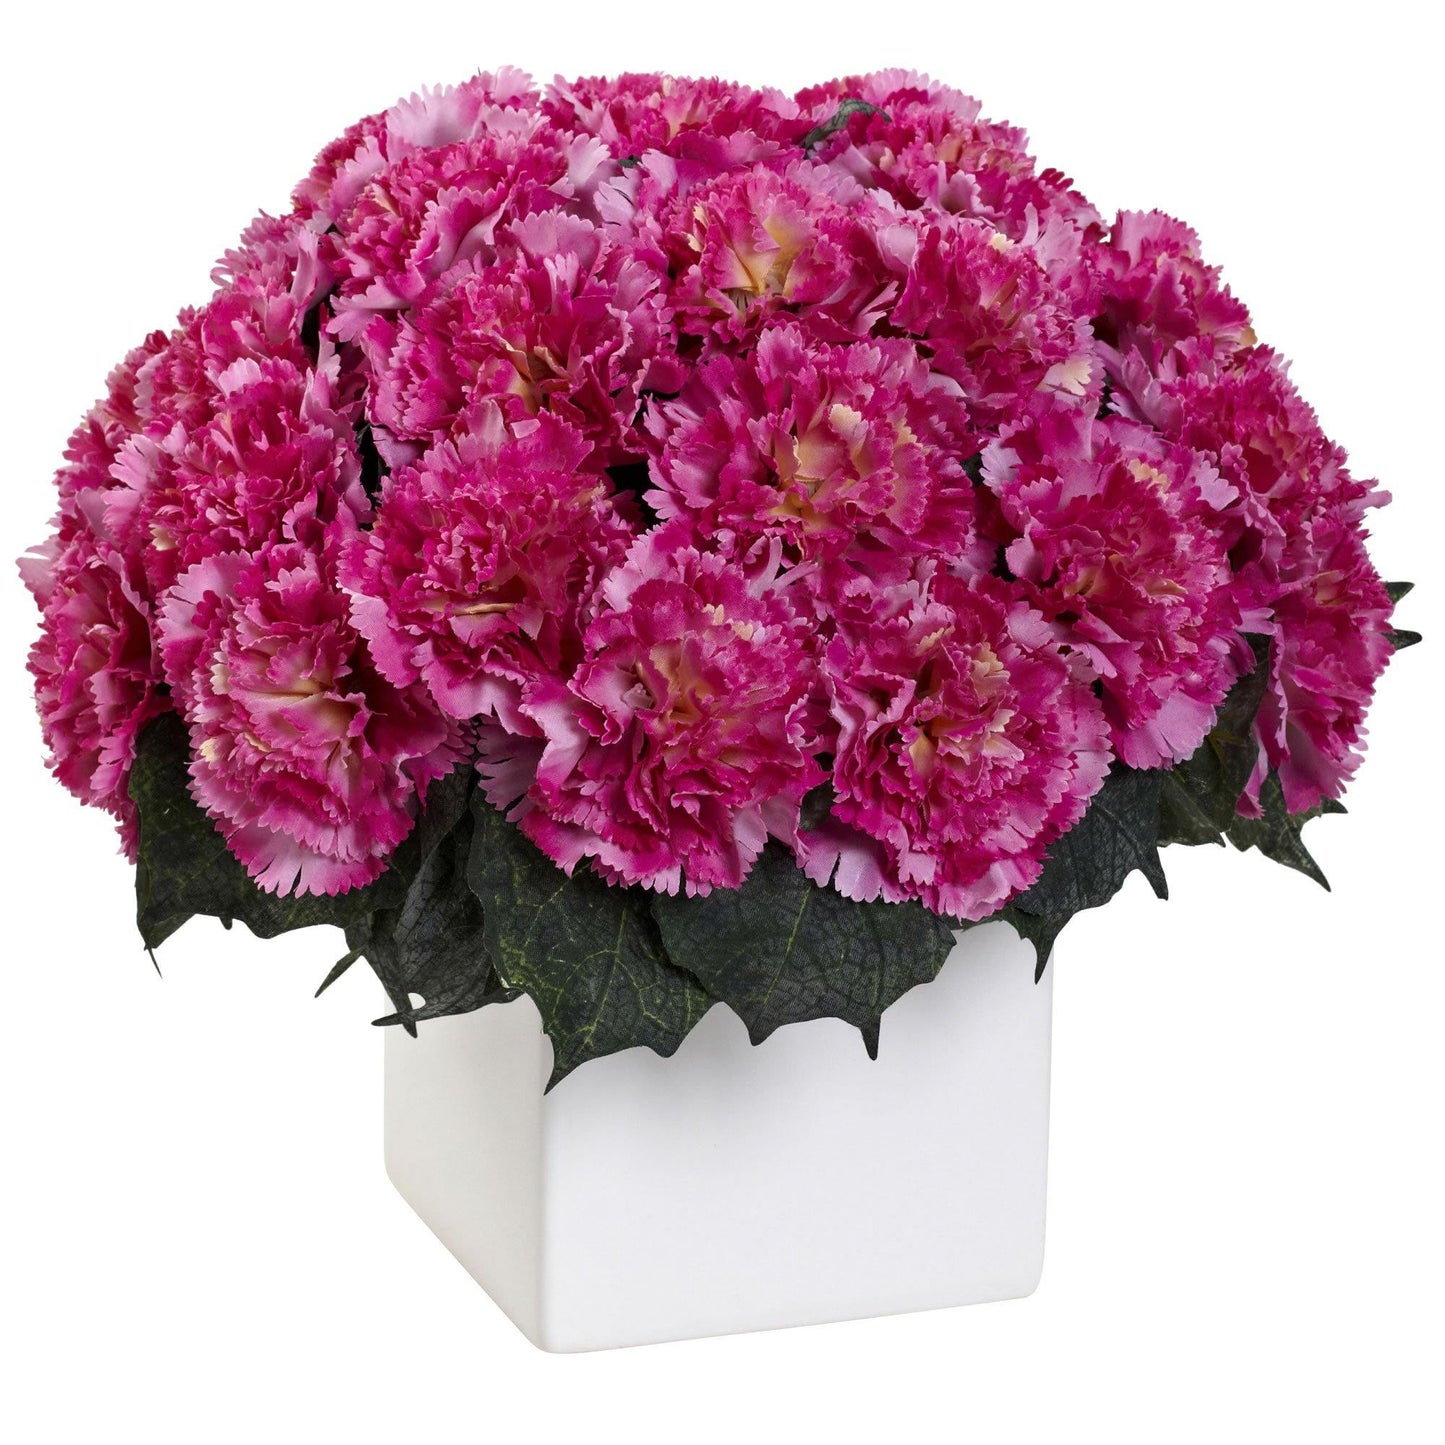 Carnation Arrangement w/Vase by Nearly Natural